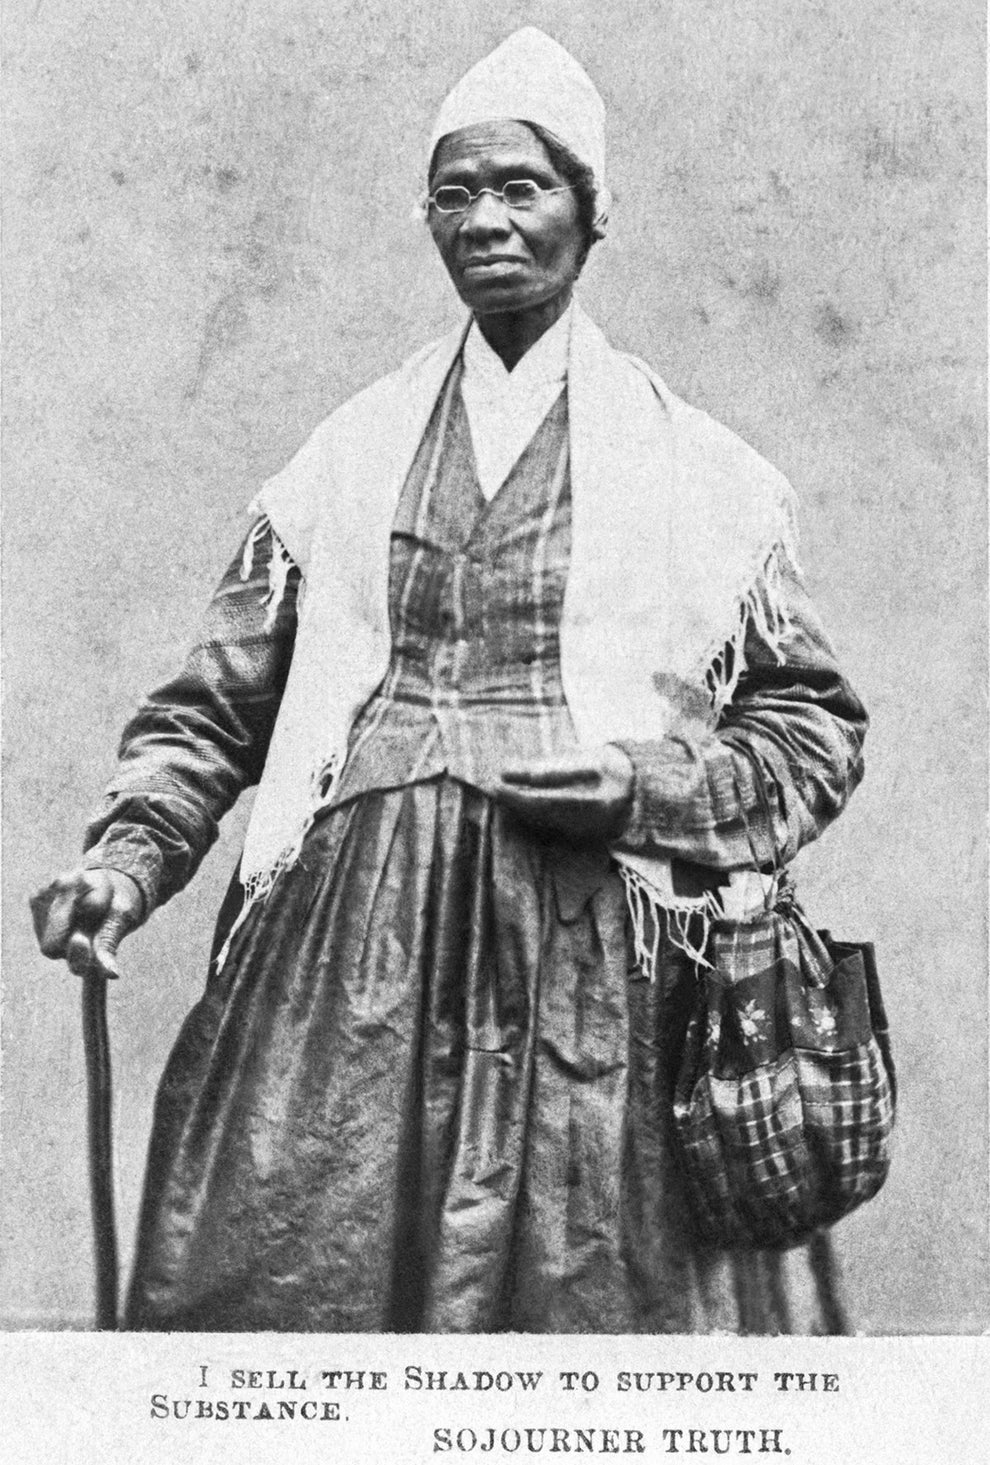 Sojourner Truth, abolitionist and women's rights advocate.